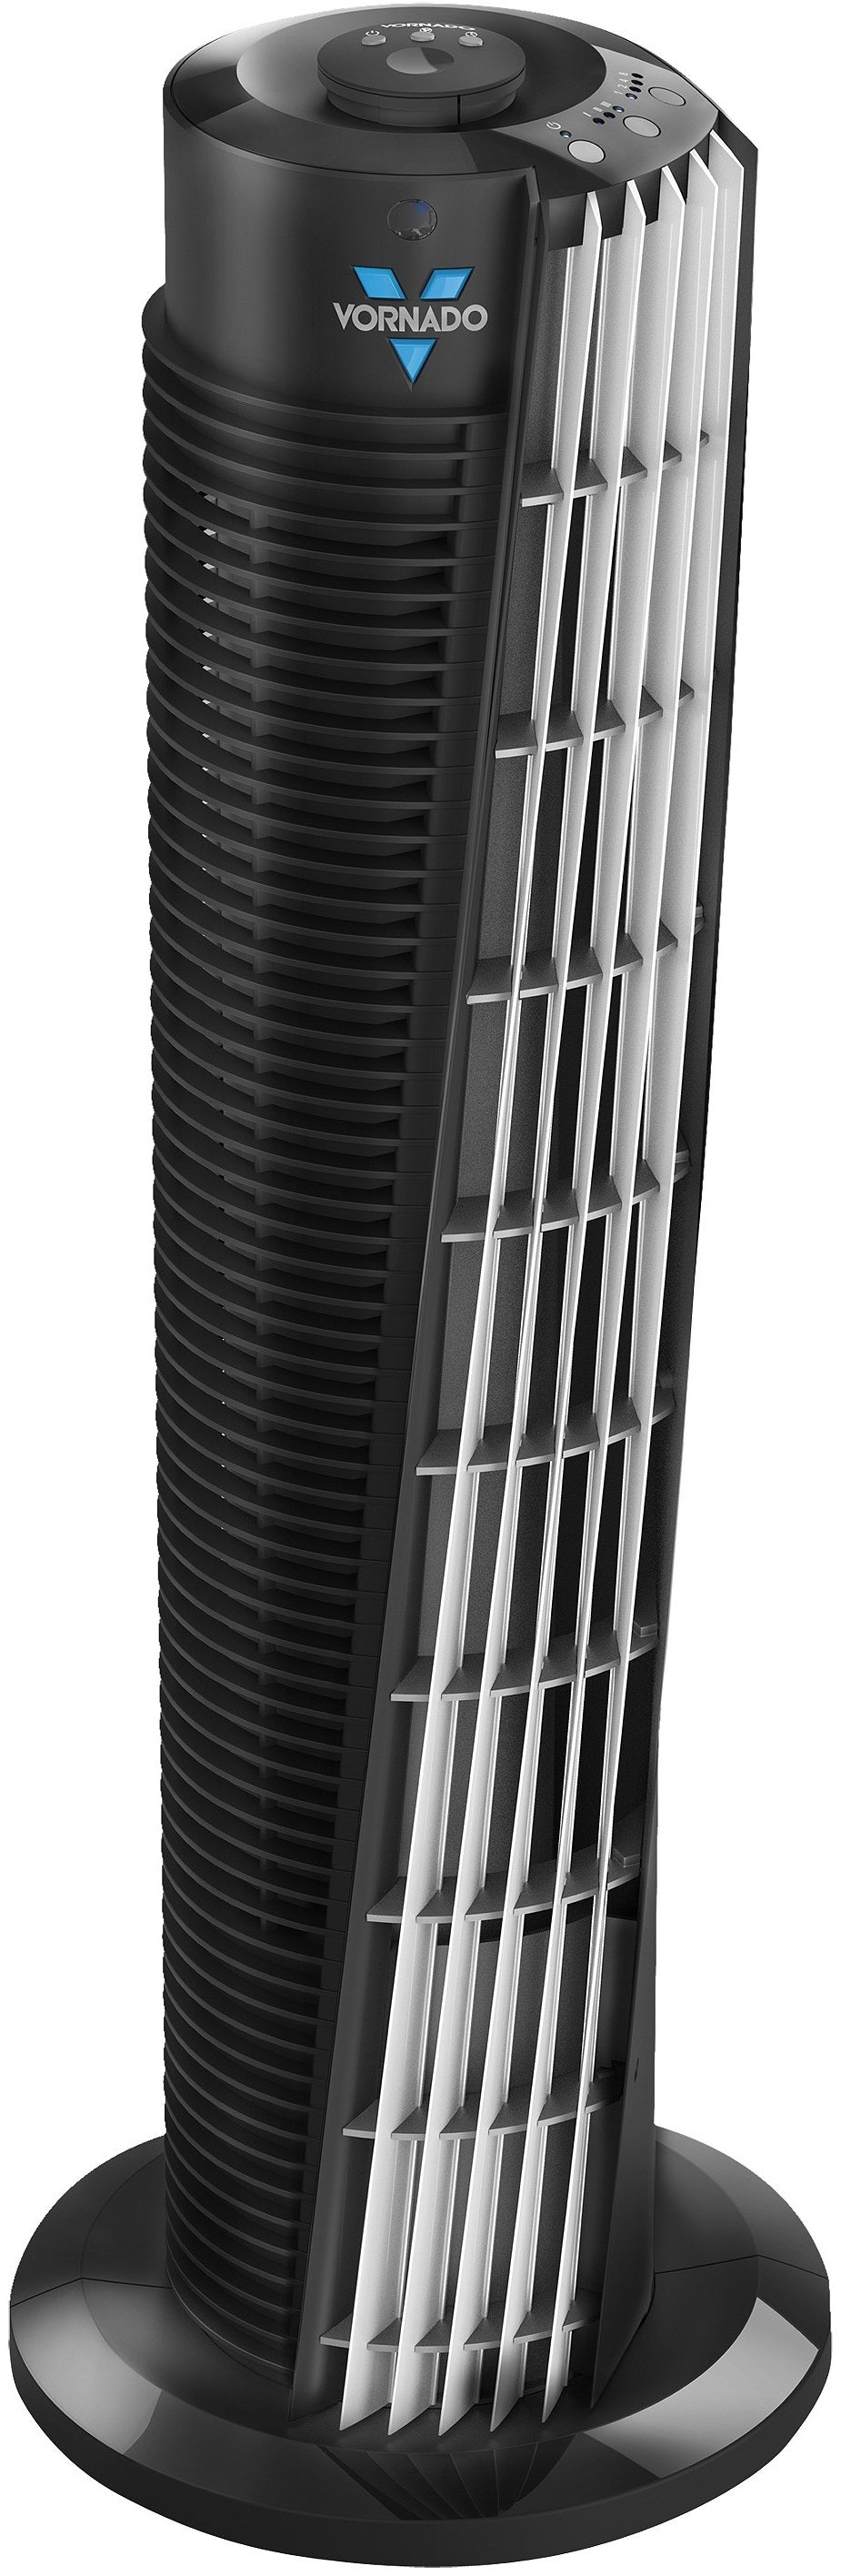 buy tower fans at cheap rate in bulk. wholesale & retail bulk venting tools & accessories store.